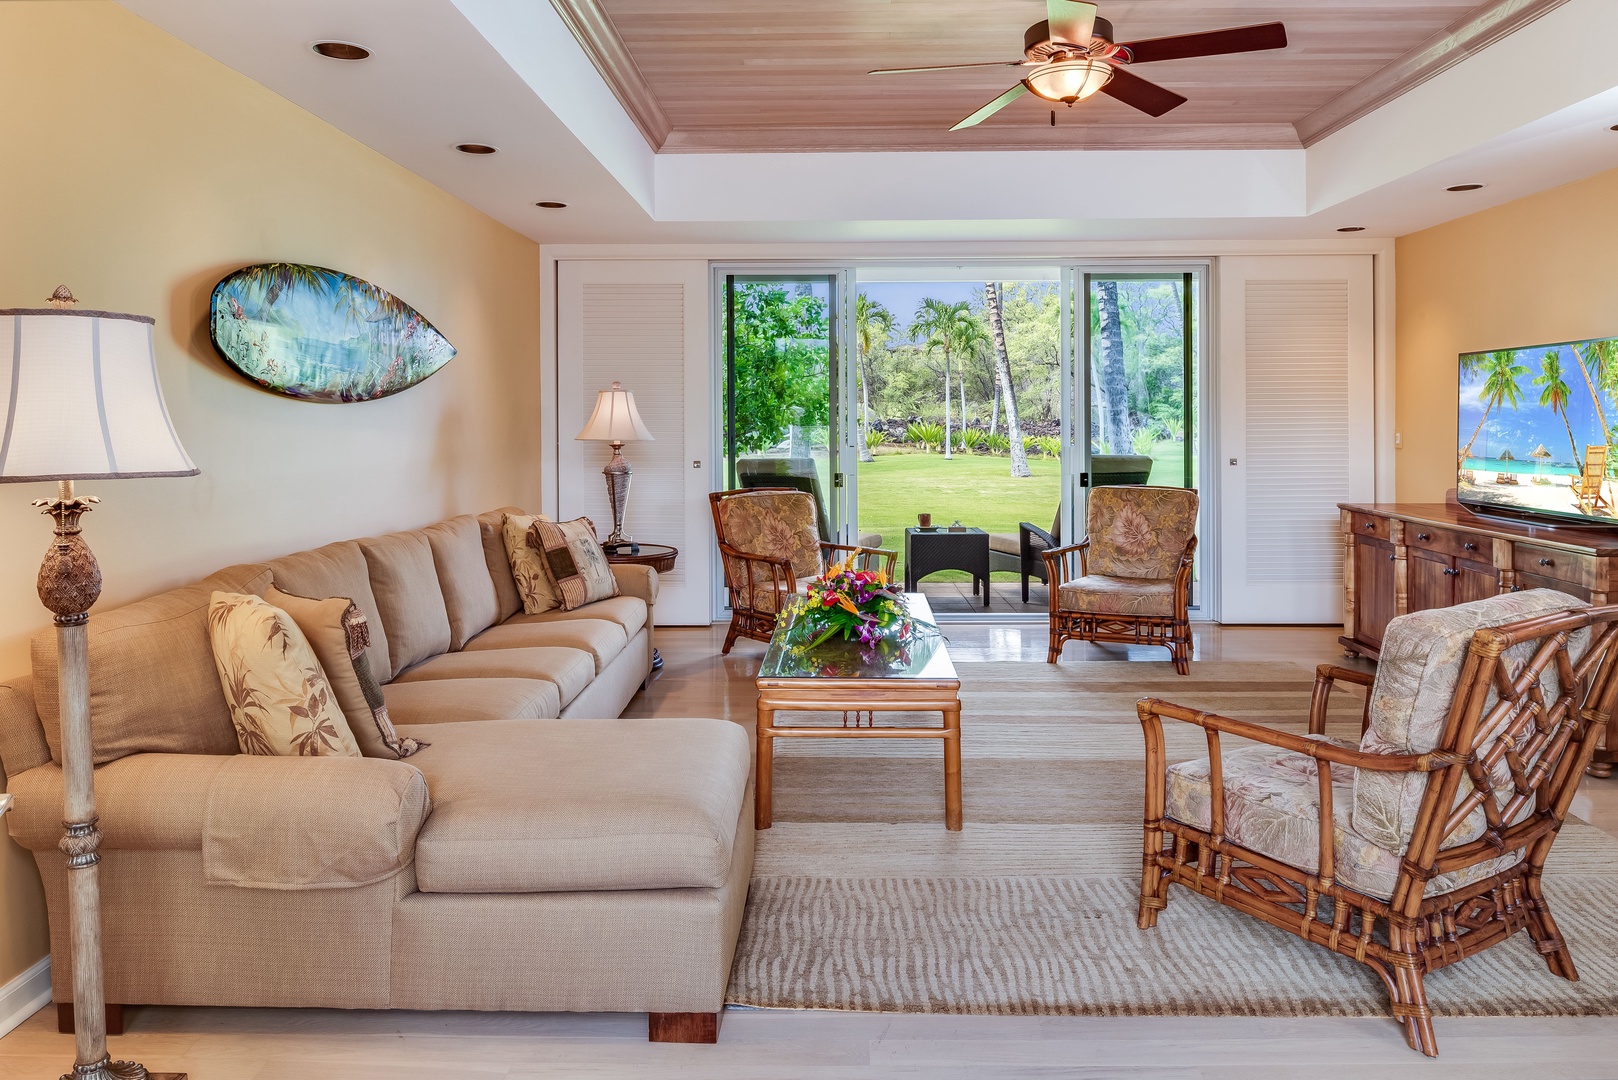 Kamuela Vacation Rentals, The Islands D3 - Spacious Living Room Opens to Beautiful Landscaped Grounds!